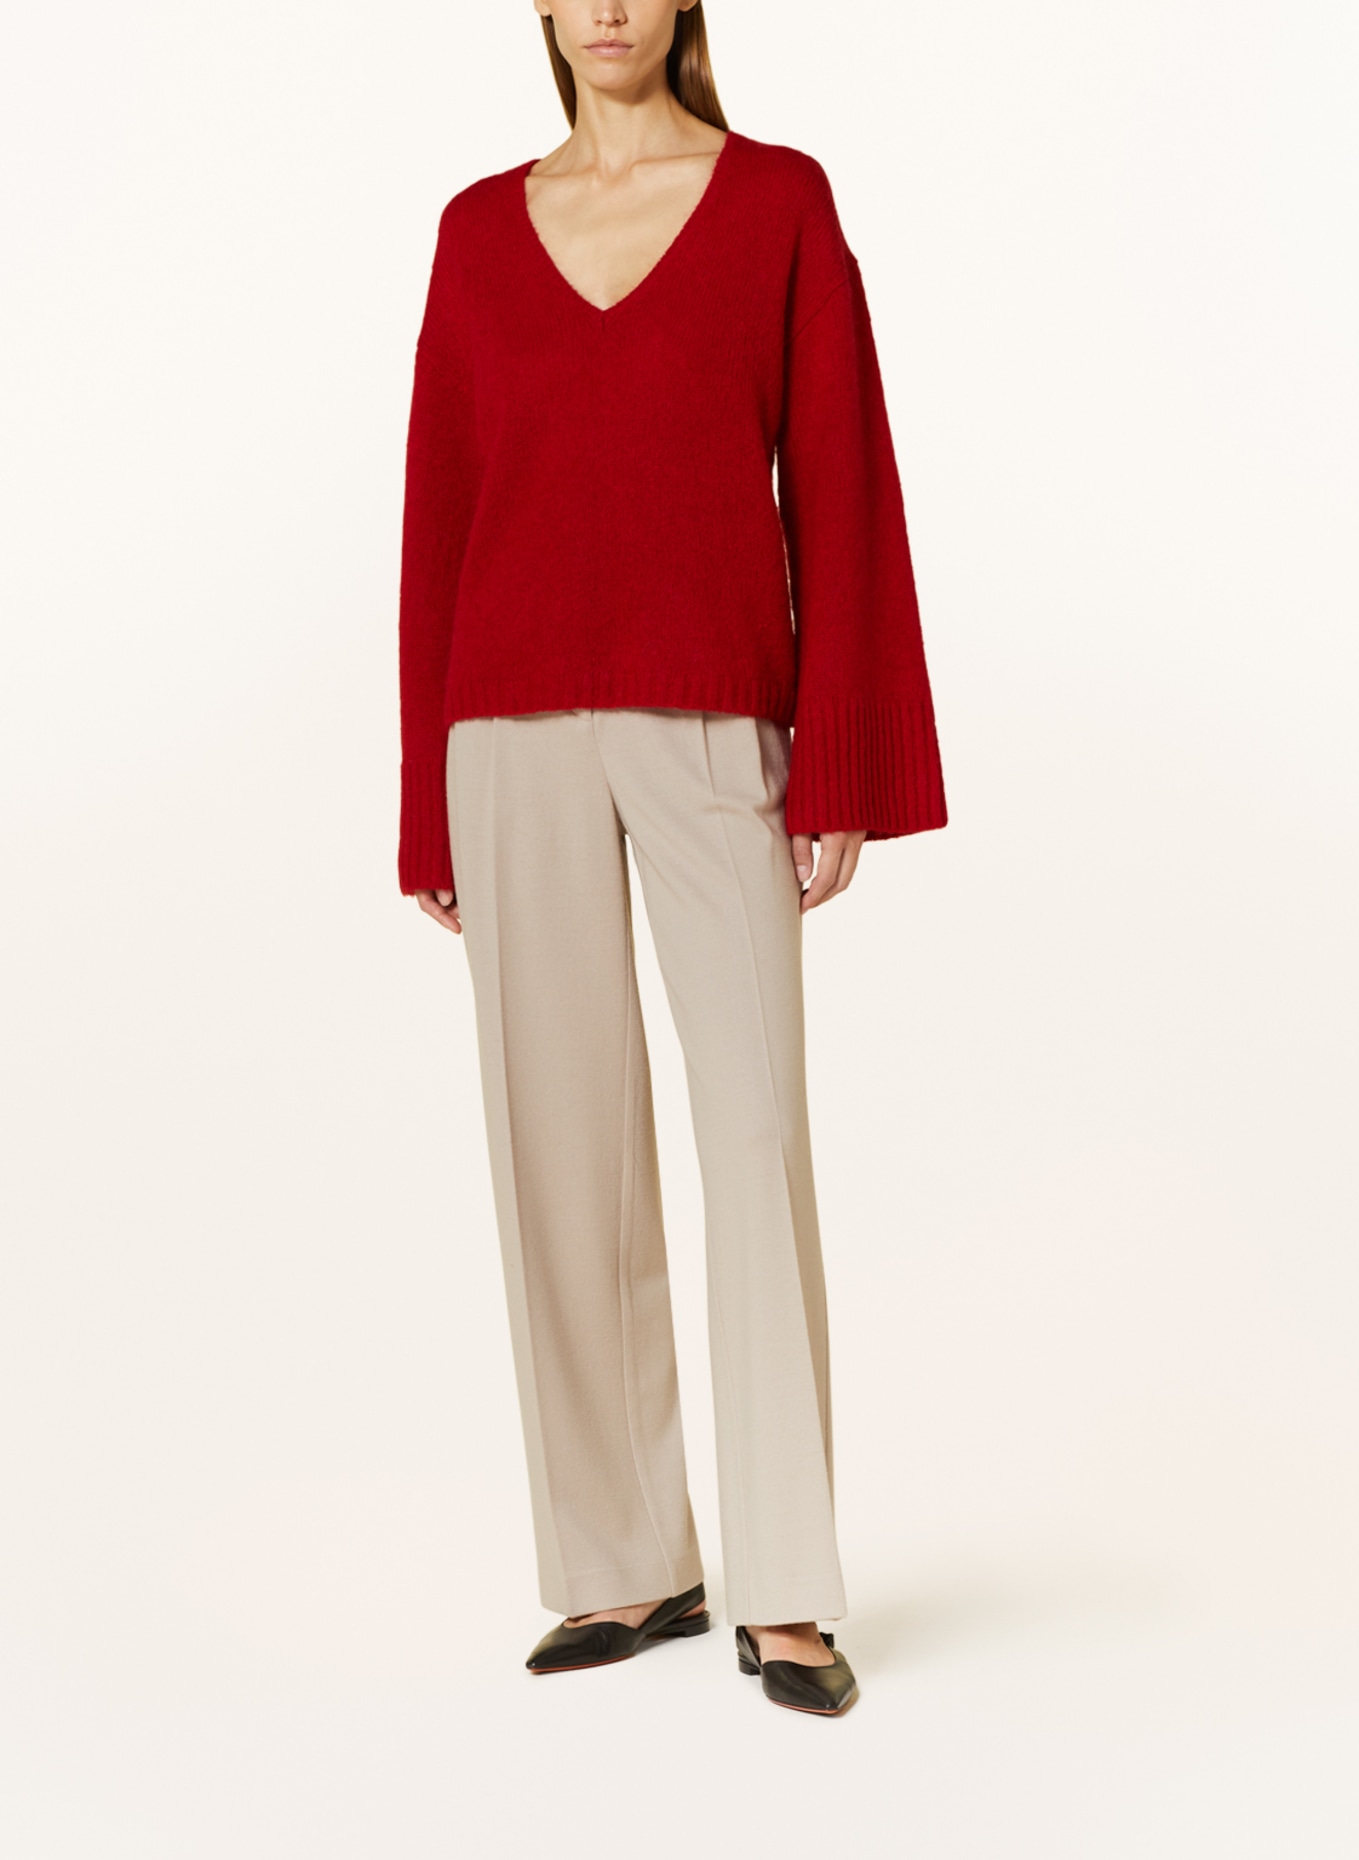 BY MALENE BIRGER Sweater CIMONE with mohair, Color: RED (Image 2)